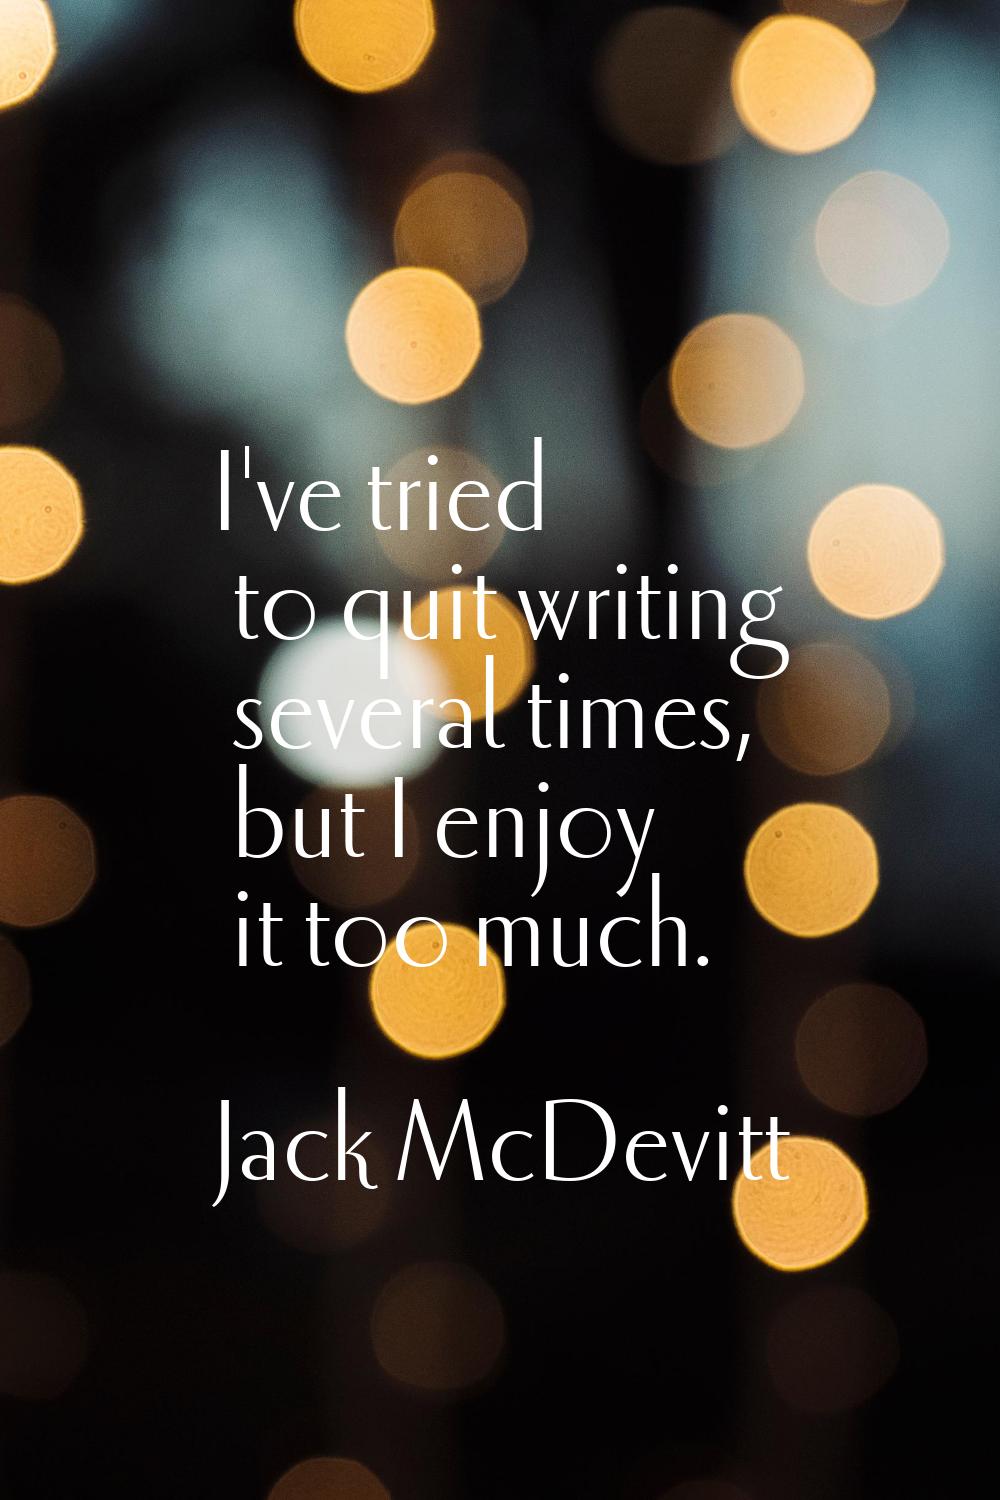 I've tried to quit writing several times, but I enjoy it too much.